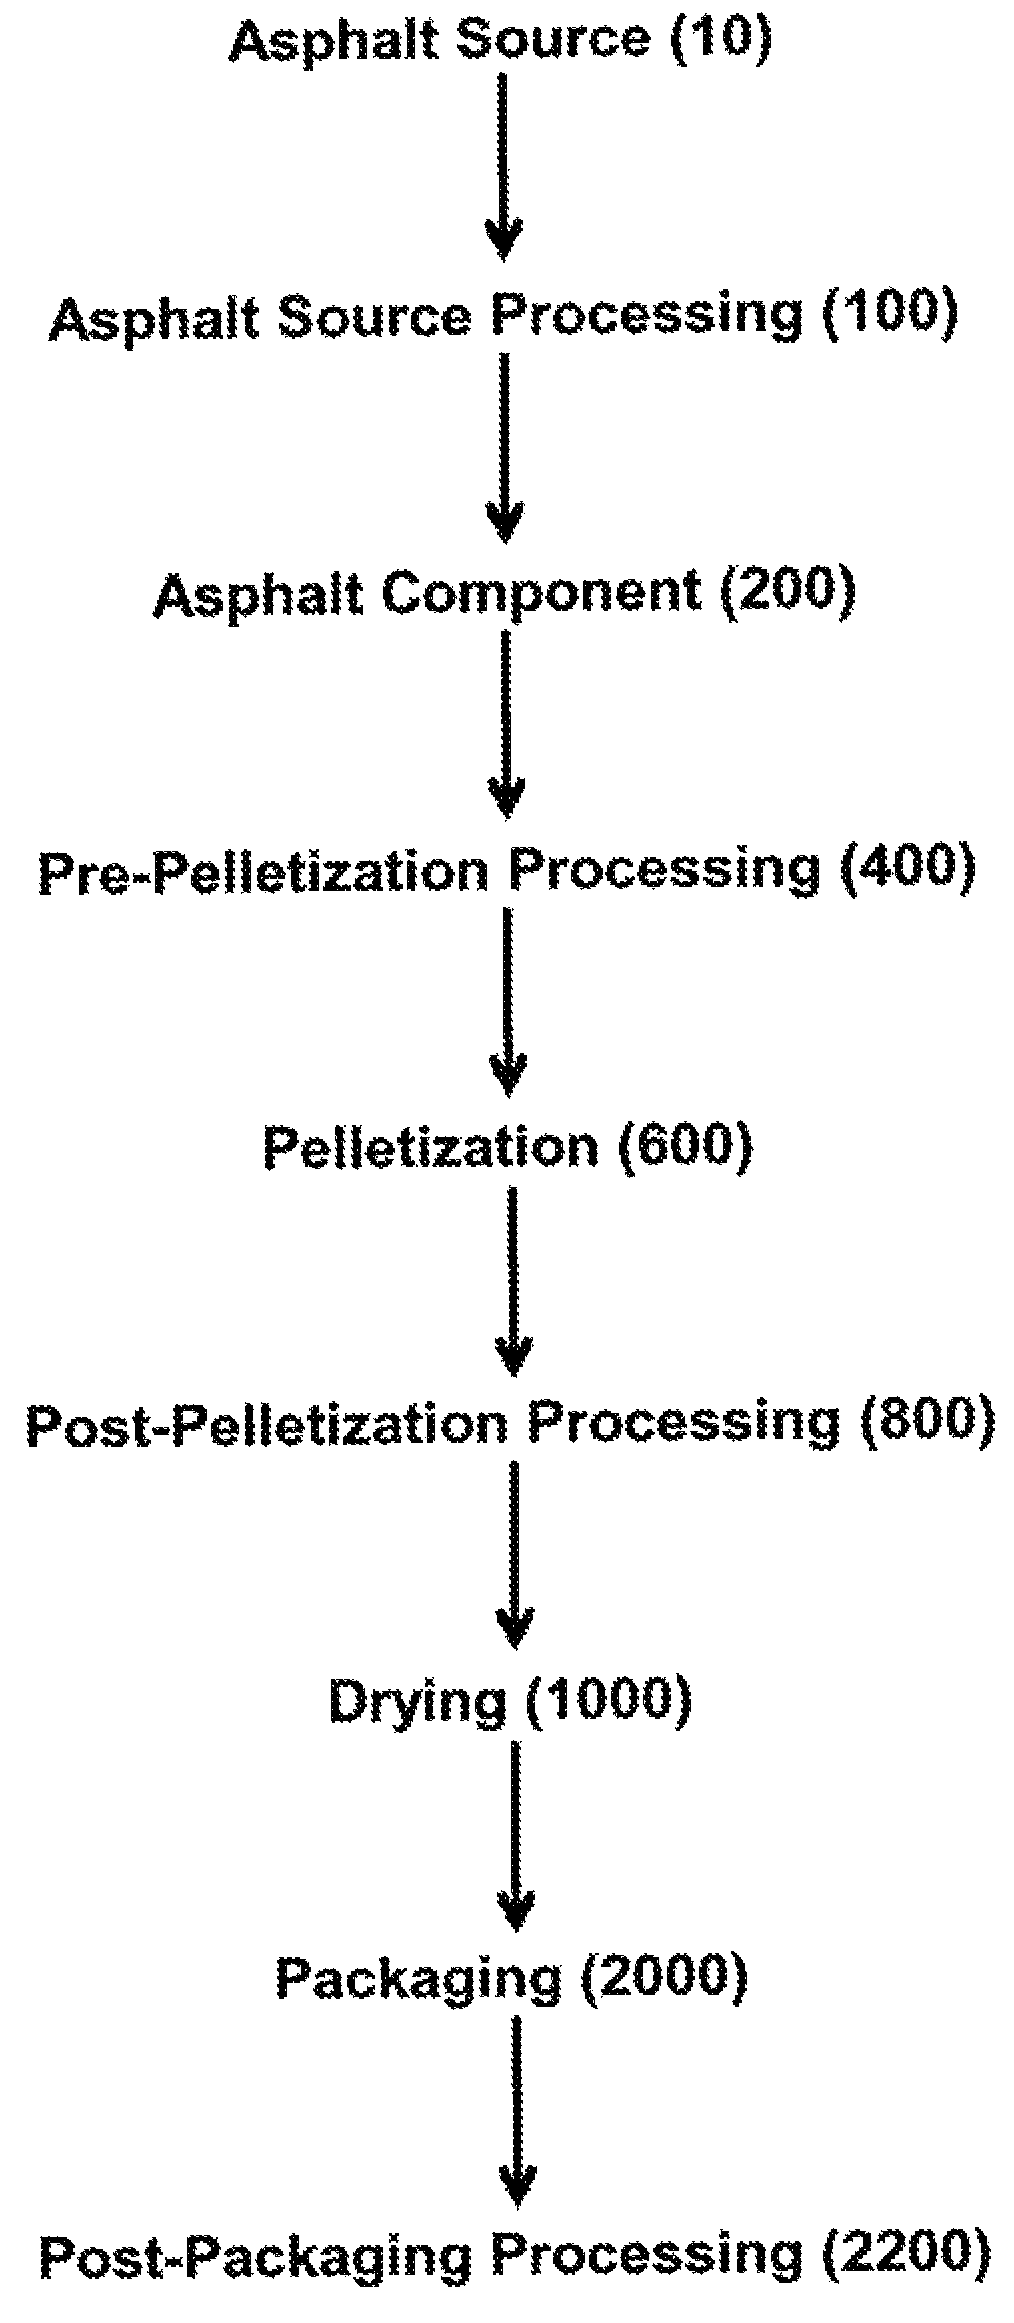 Continuous process for fractioning, combination, and recombination of asphalt components for pelletization and packaging of asphalt and asphalt-containing products